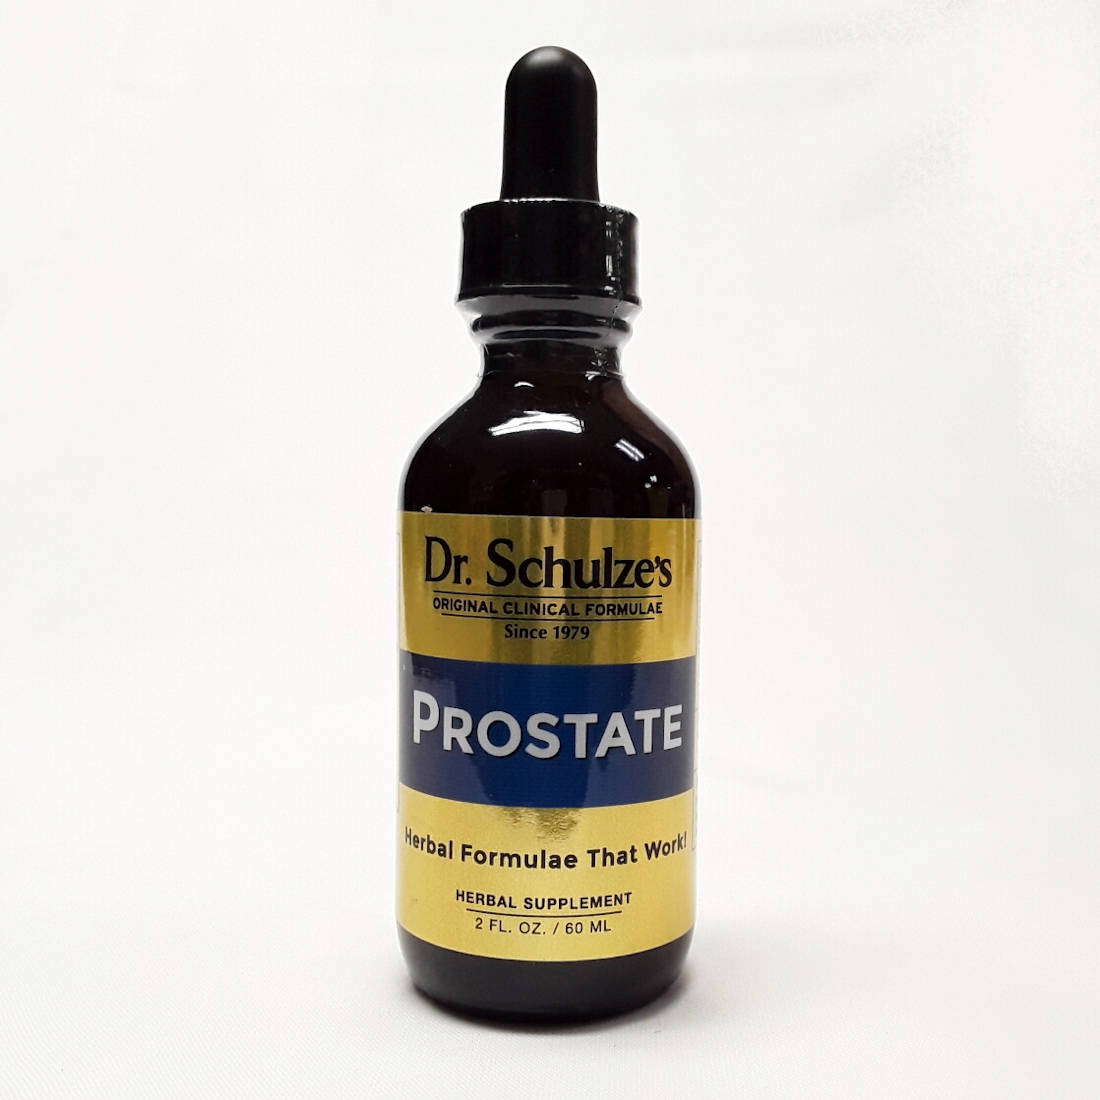 Dr Schulzes Prostate Formula Website Product Image View